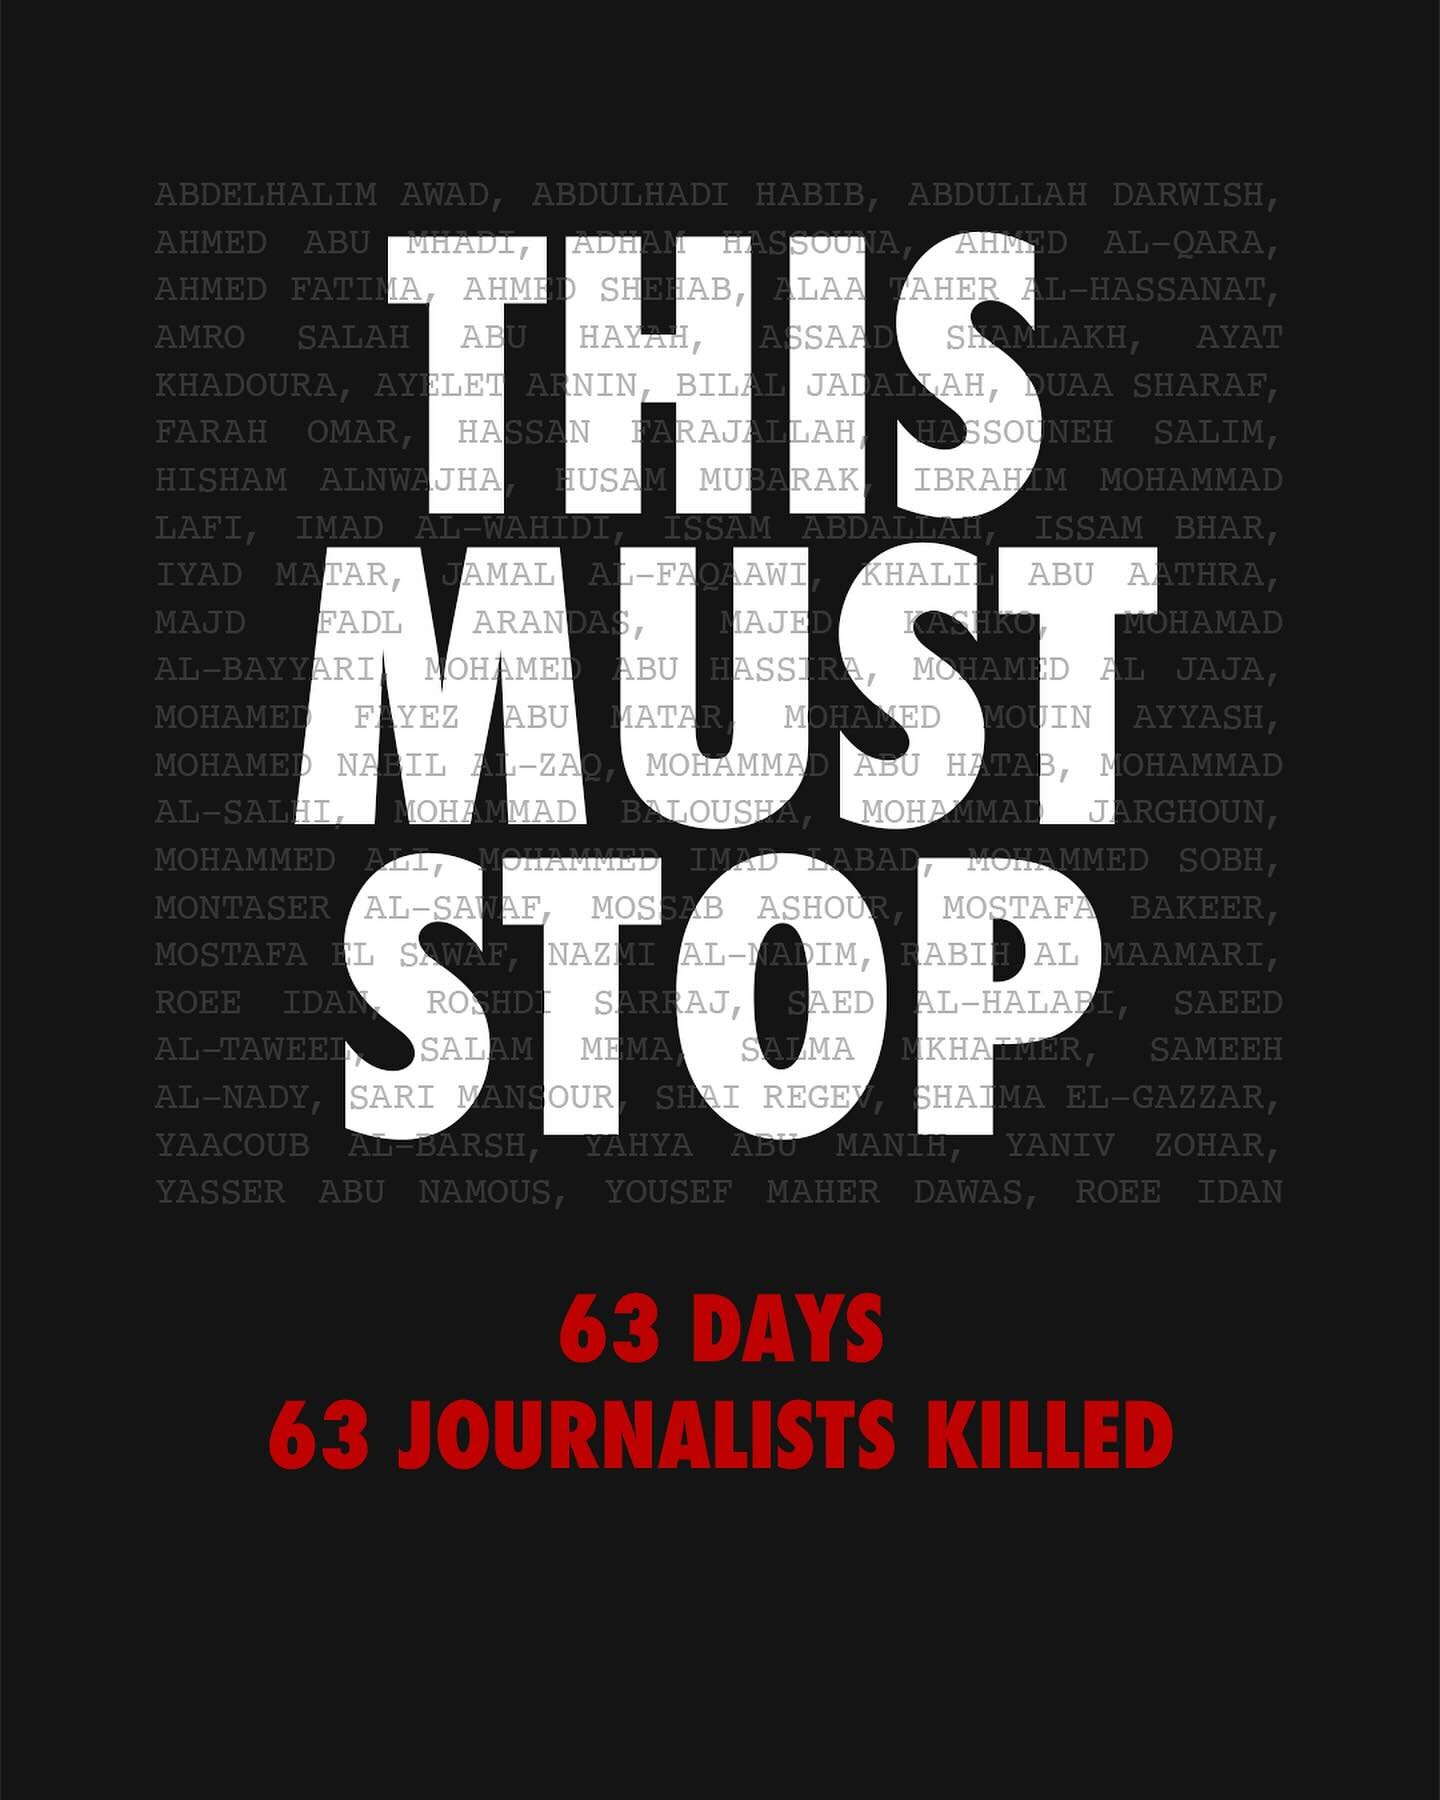 800+ journalists and media workers demand an end to the killing of journalists in Gaza and the wider region. For more information on how to sign on and get involved, see the link in my bio.
#thismuststop
@forourcolleagues